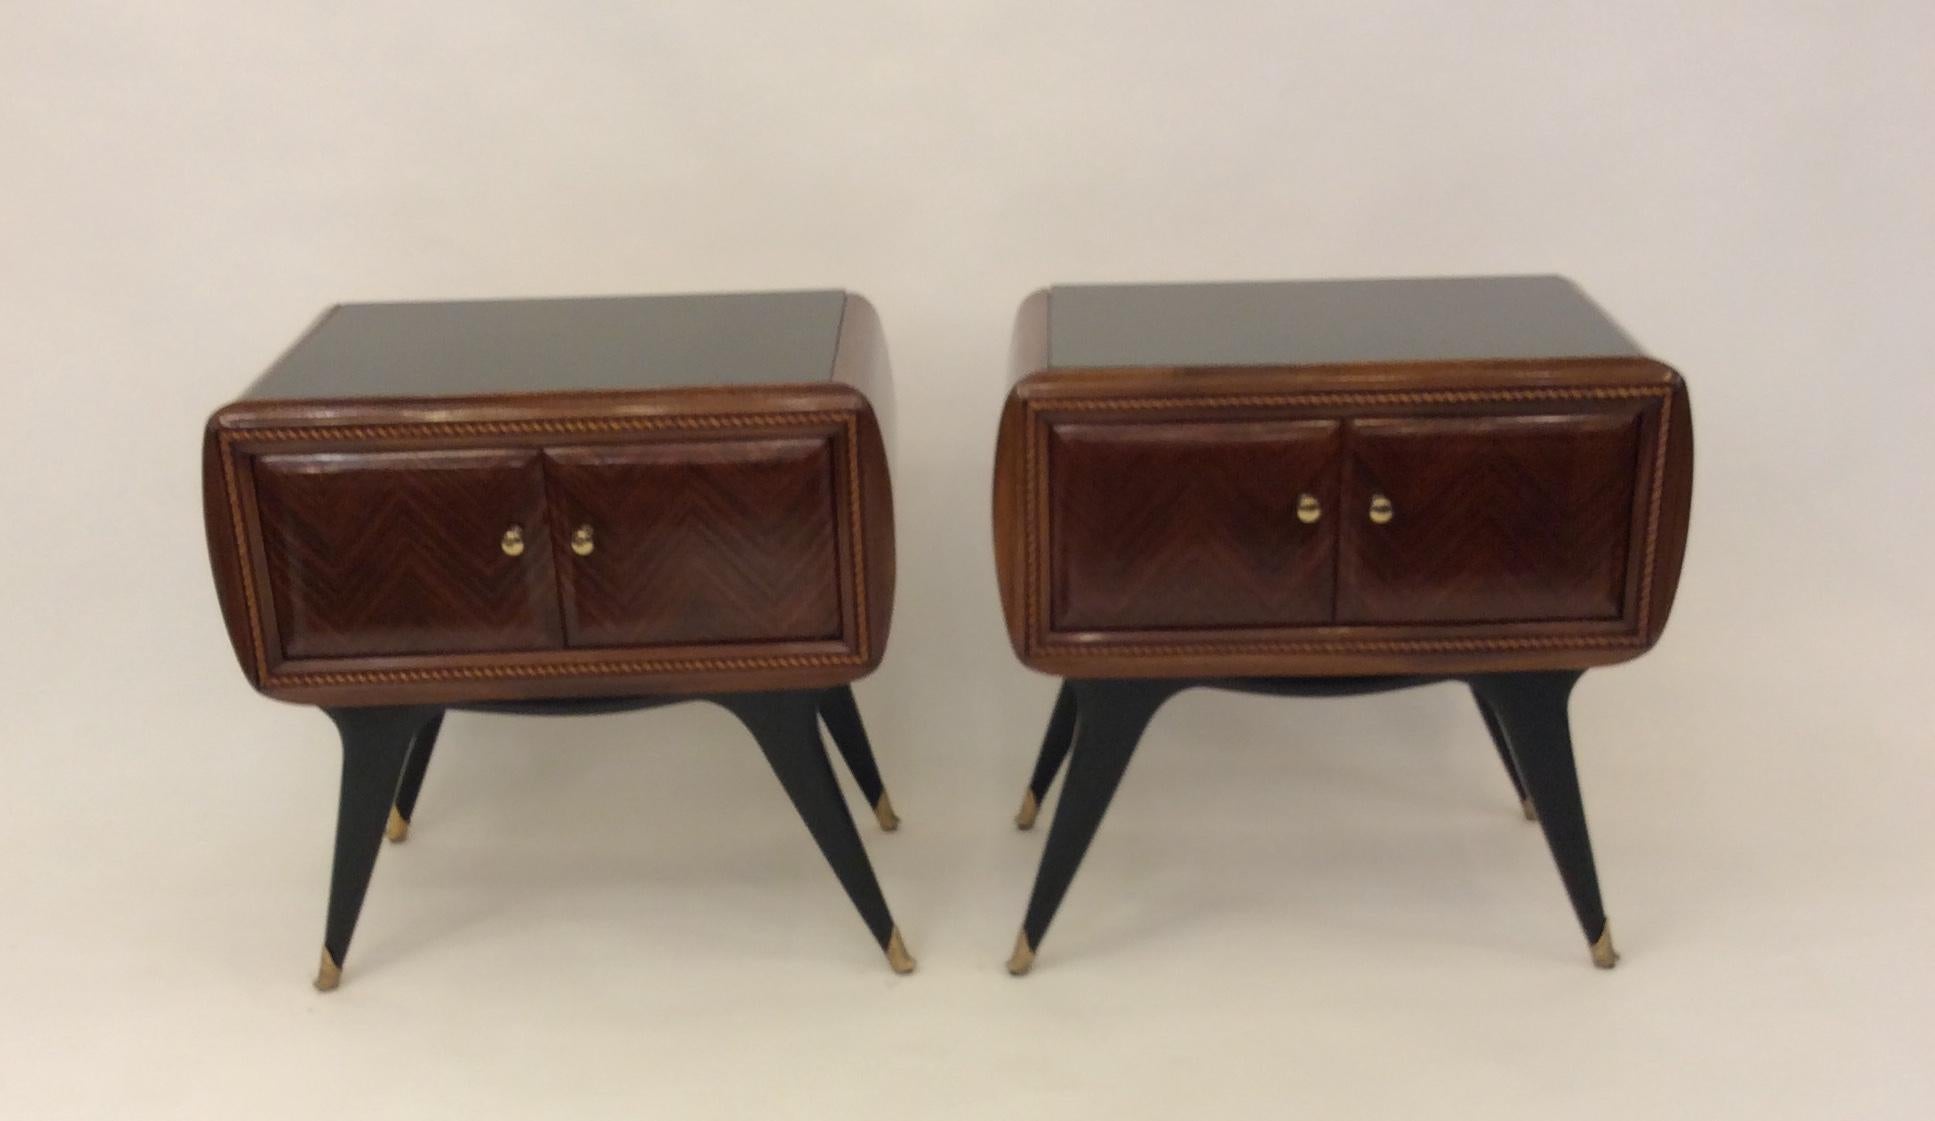 A fantastic pair of midcentury Italian designed side chests in exotic wood with amazing marquetry double doors black glass top, sculptural black lacquered legs leading to brass shoes could work as night stand or side chests amazing quality